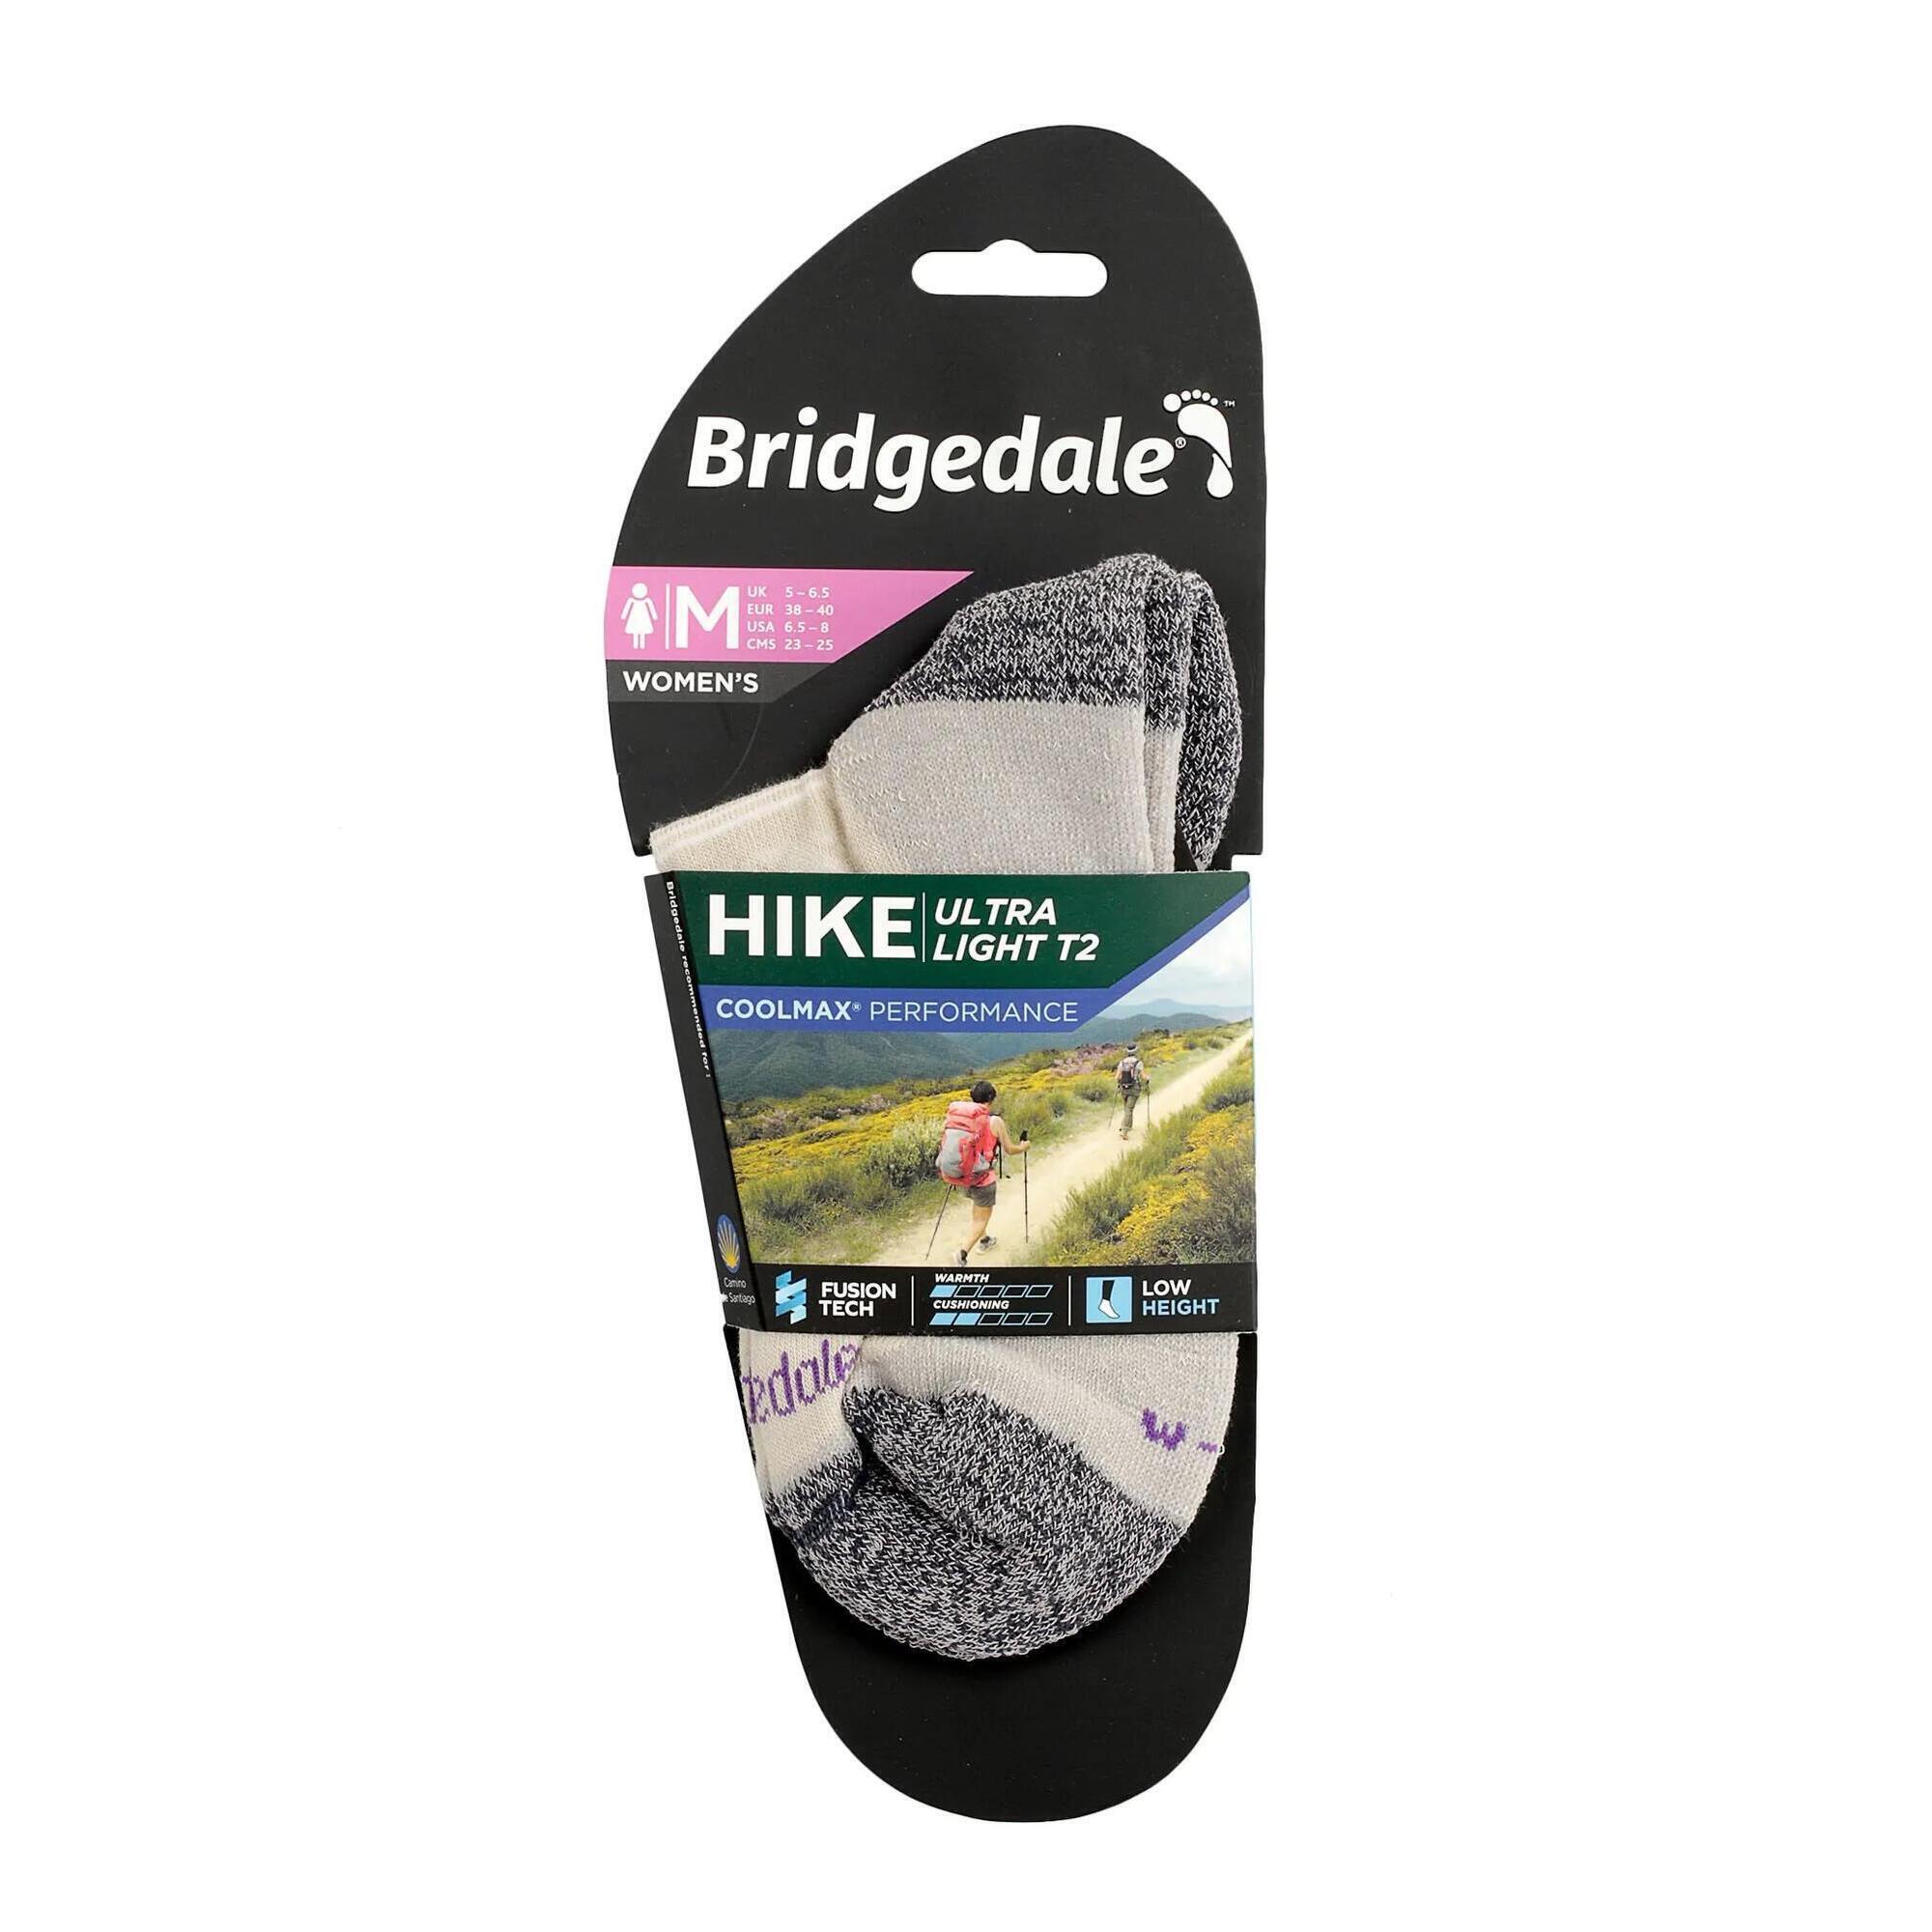 BRIDGEDALE HIKE Ultralight T2 Coolmax Performance Ankle Women's - Taupe grey